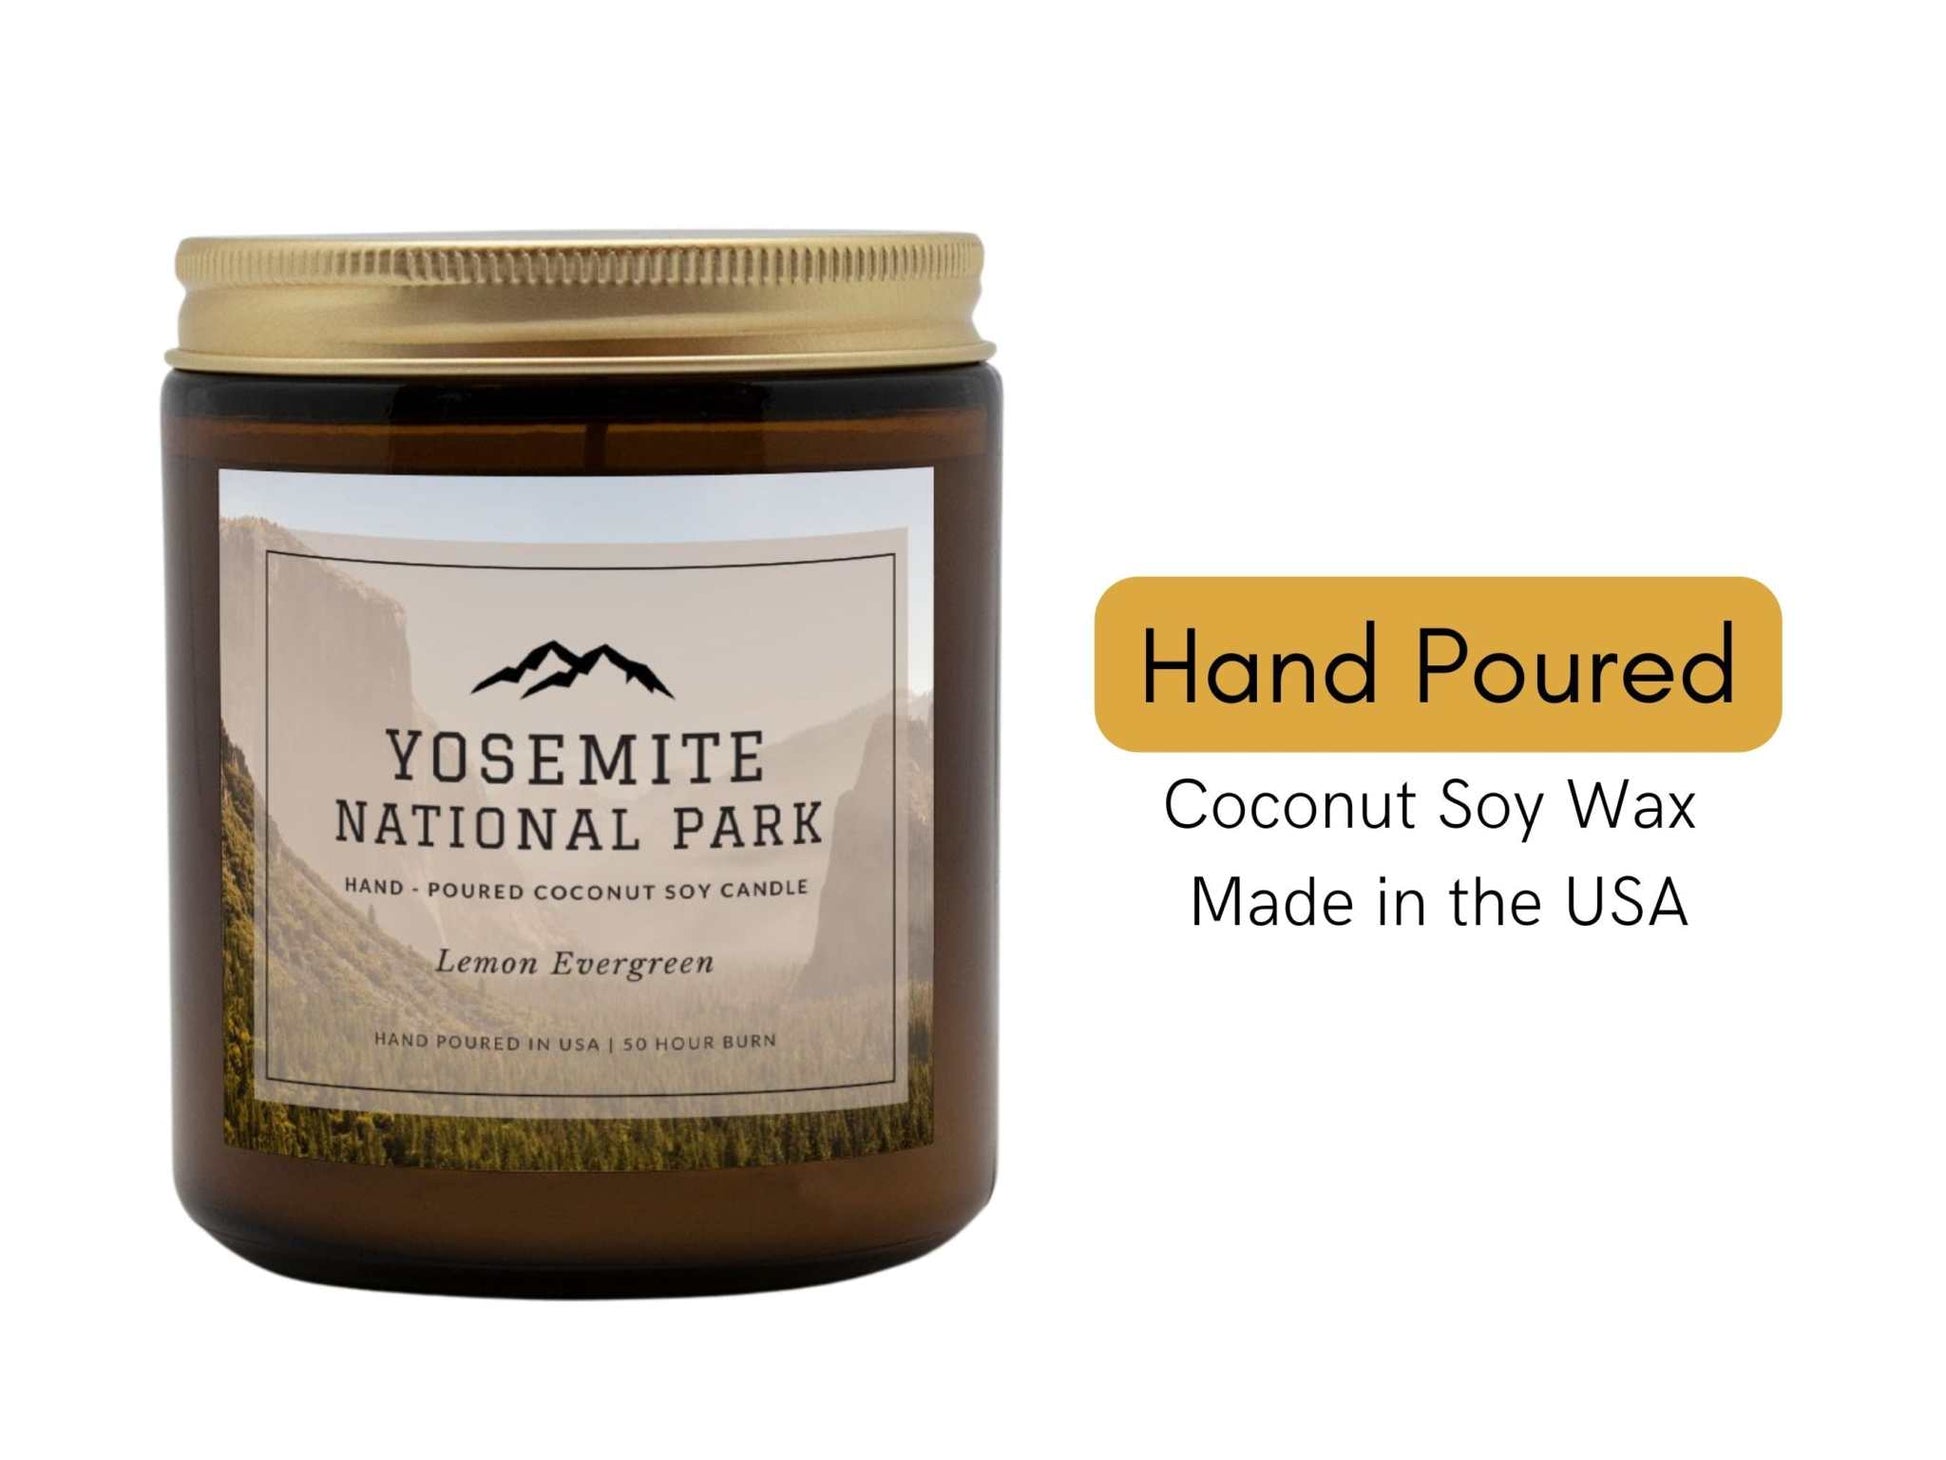 Crater Lake National Park Bergamot & Spruce CandleBring home the smell of the most beautiful places on earth, with these 9 oz coconut soy wax hand-poured National Park candles.
The Crater Lake candle scent has an he